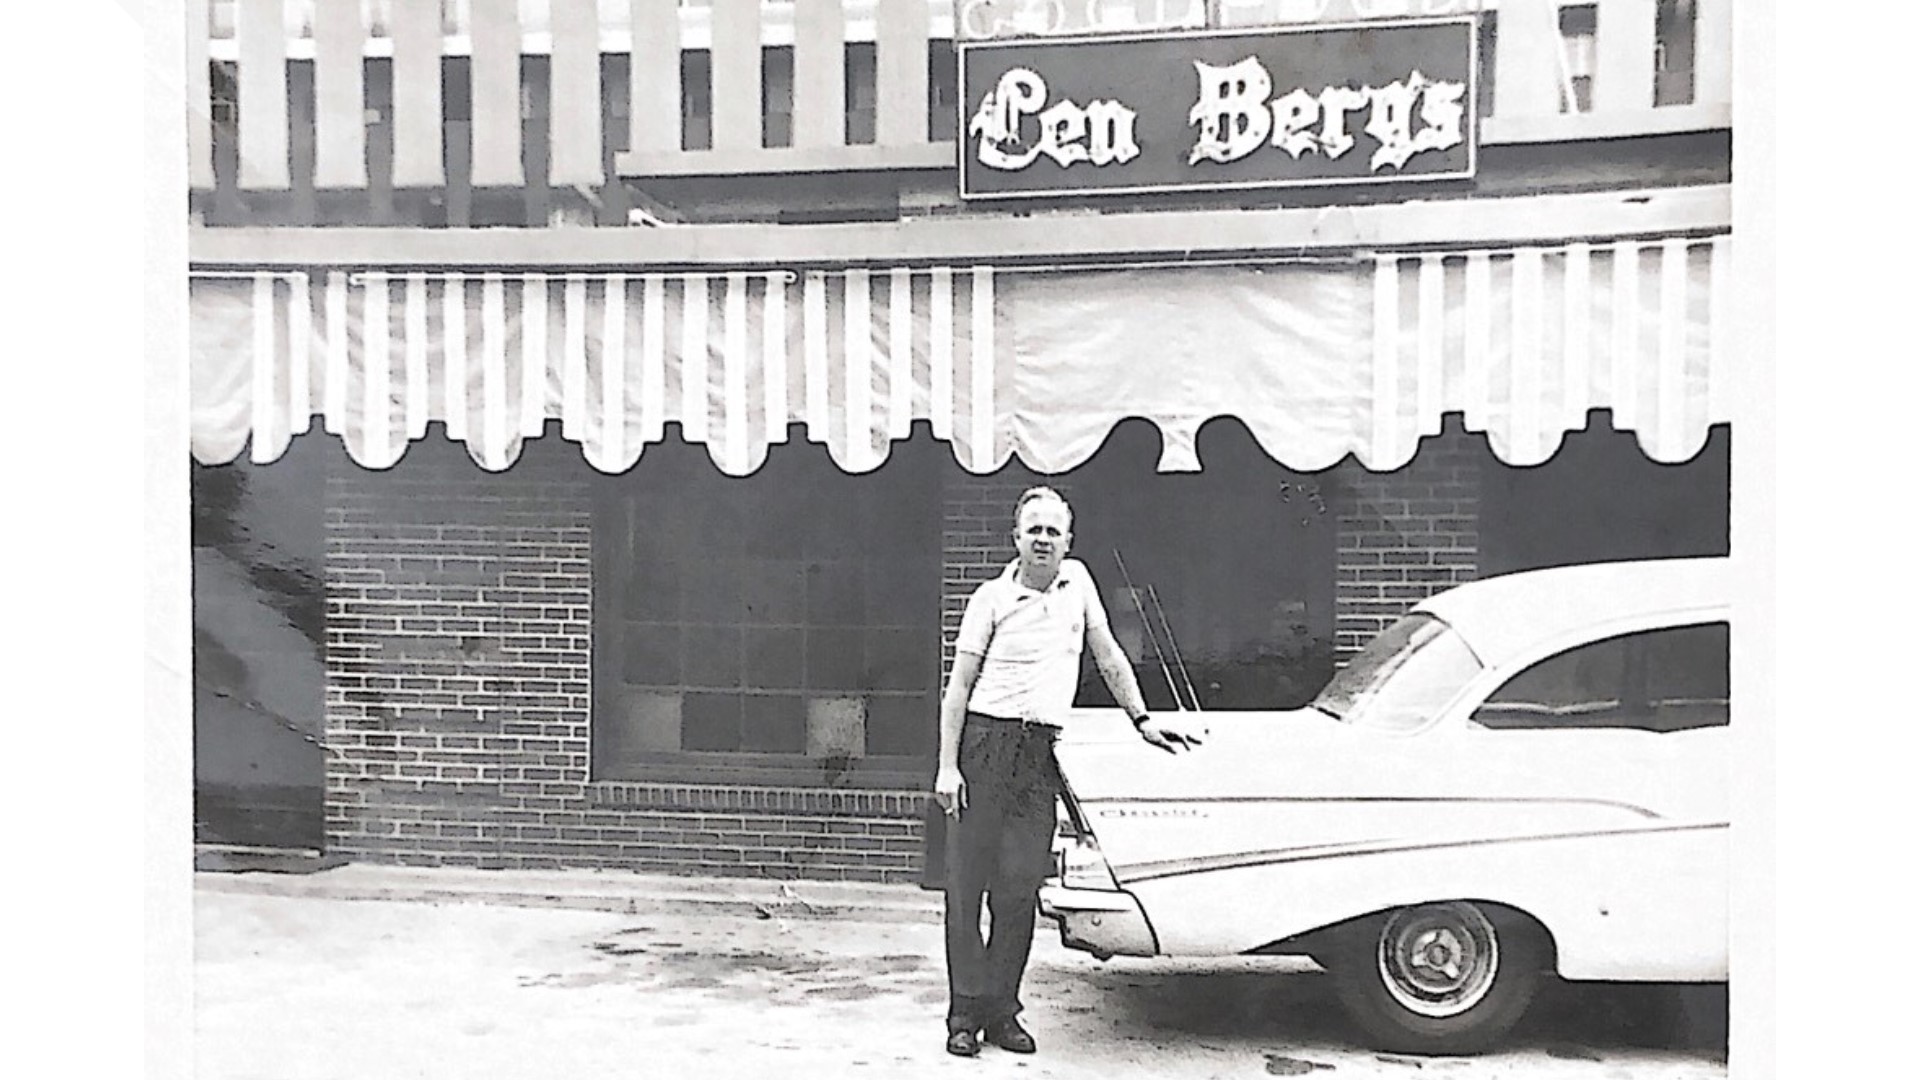 Longtime residents of Macon will tell you, when you saw "H.M.F.P.I.C... you know where" on a billboard, it was time to go to Len Berg's.